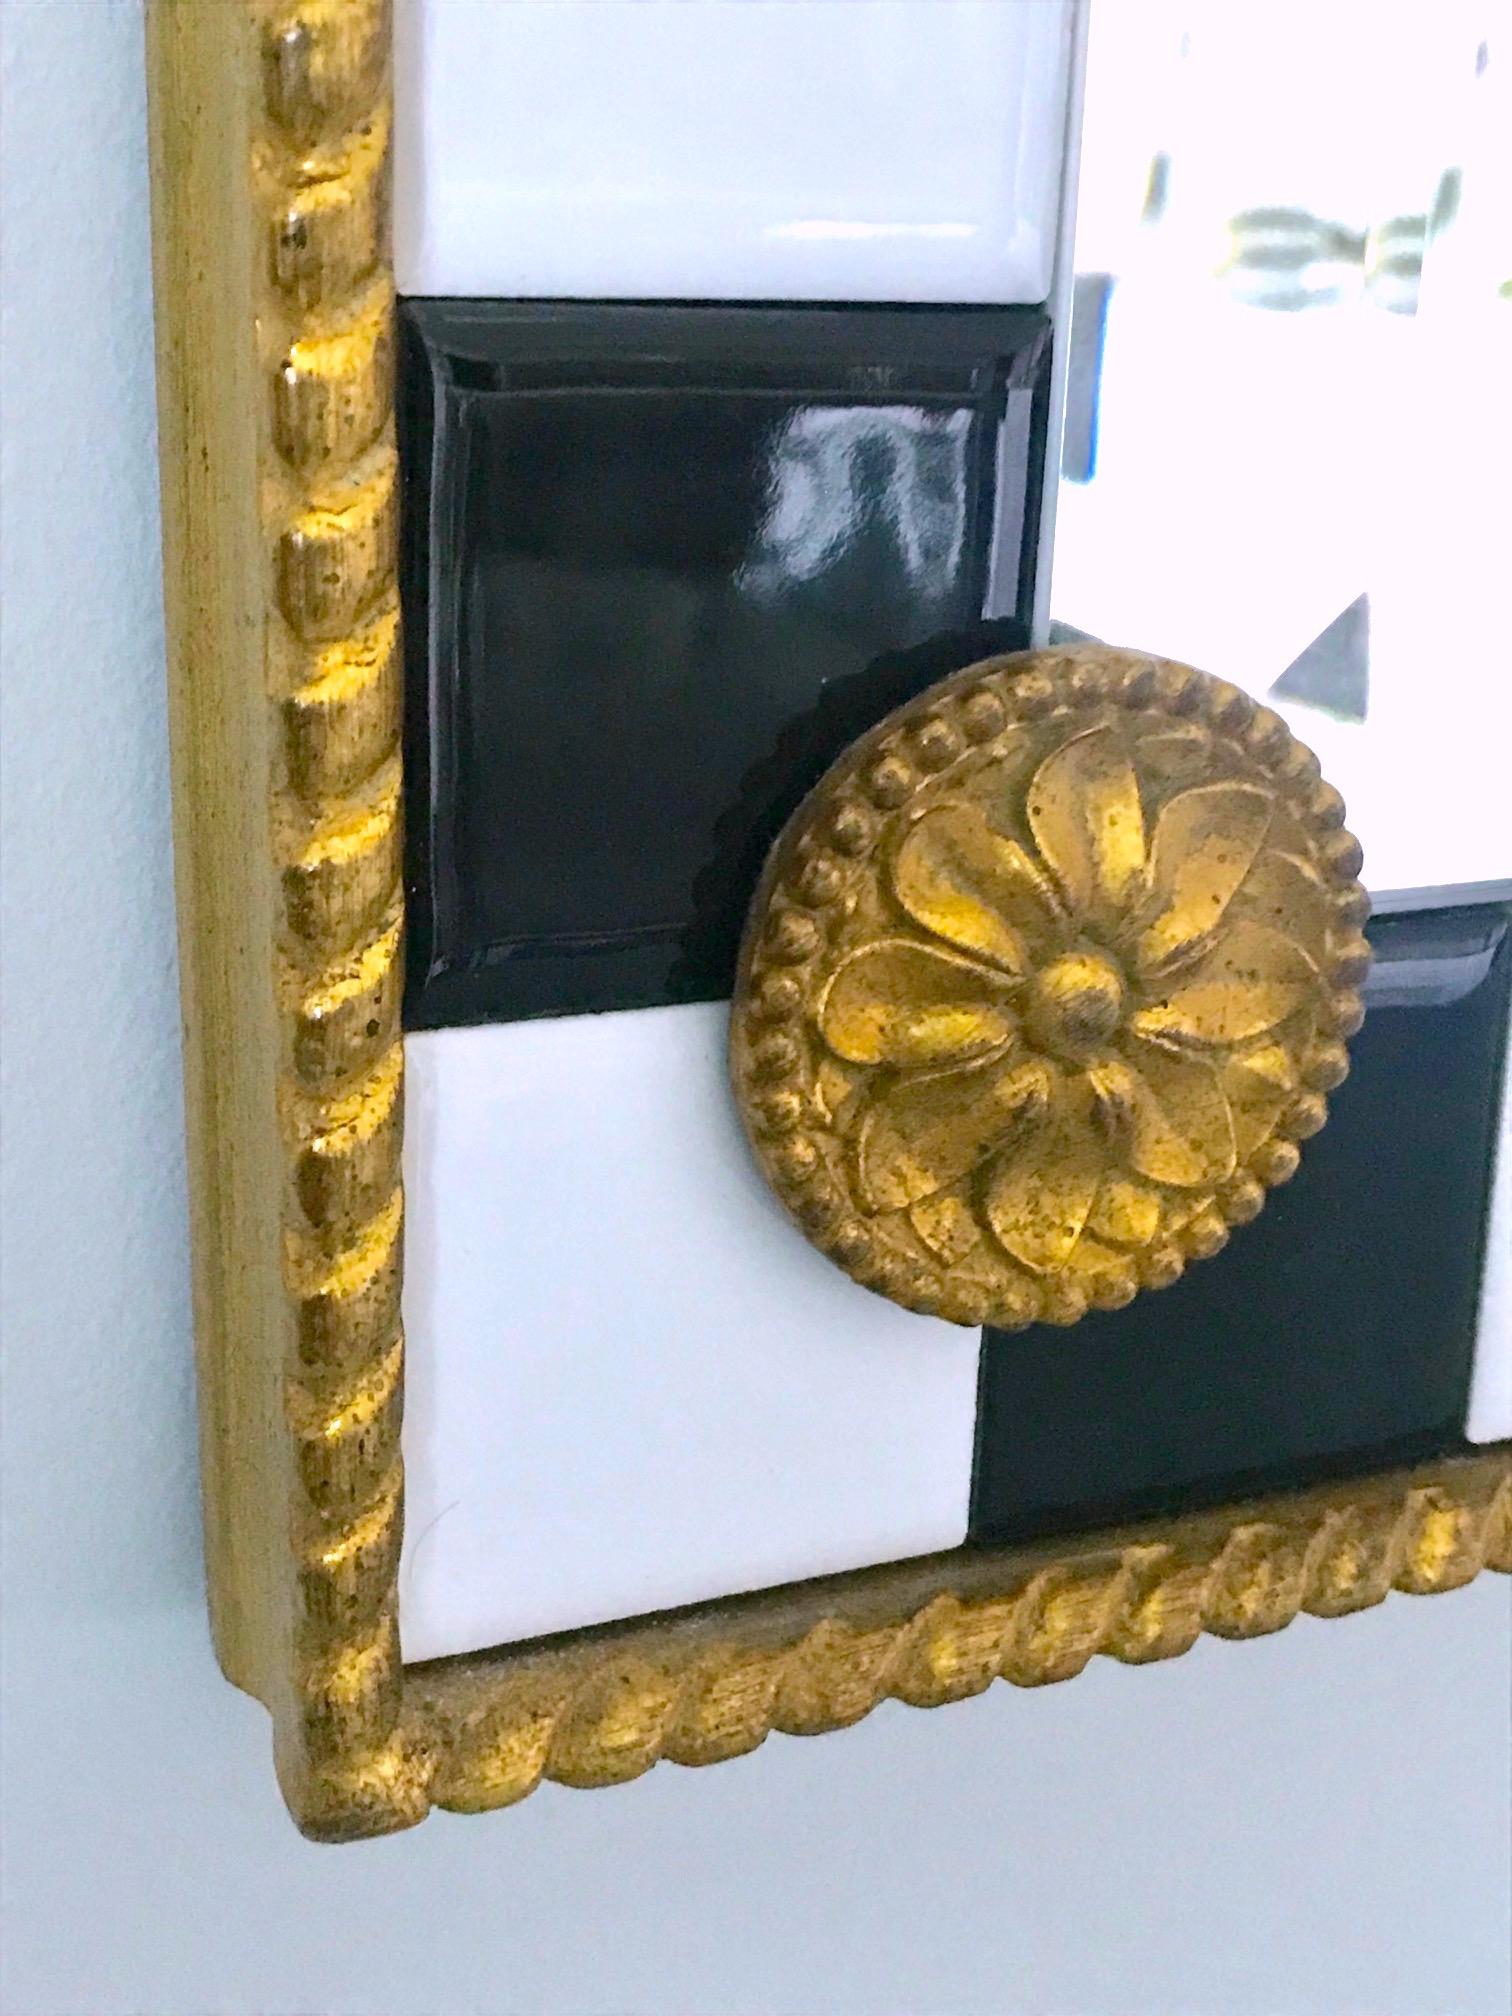 Beveled Hollywood Regency Mirror with Gold Leaf Plumes and Ceramic Tiles